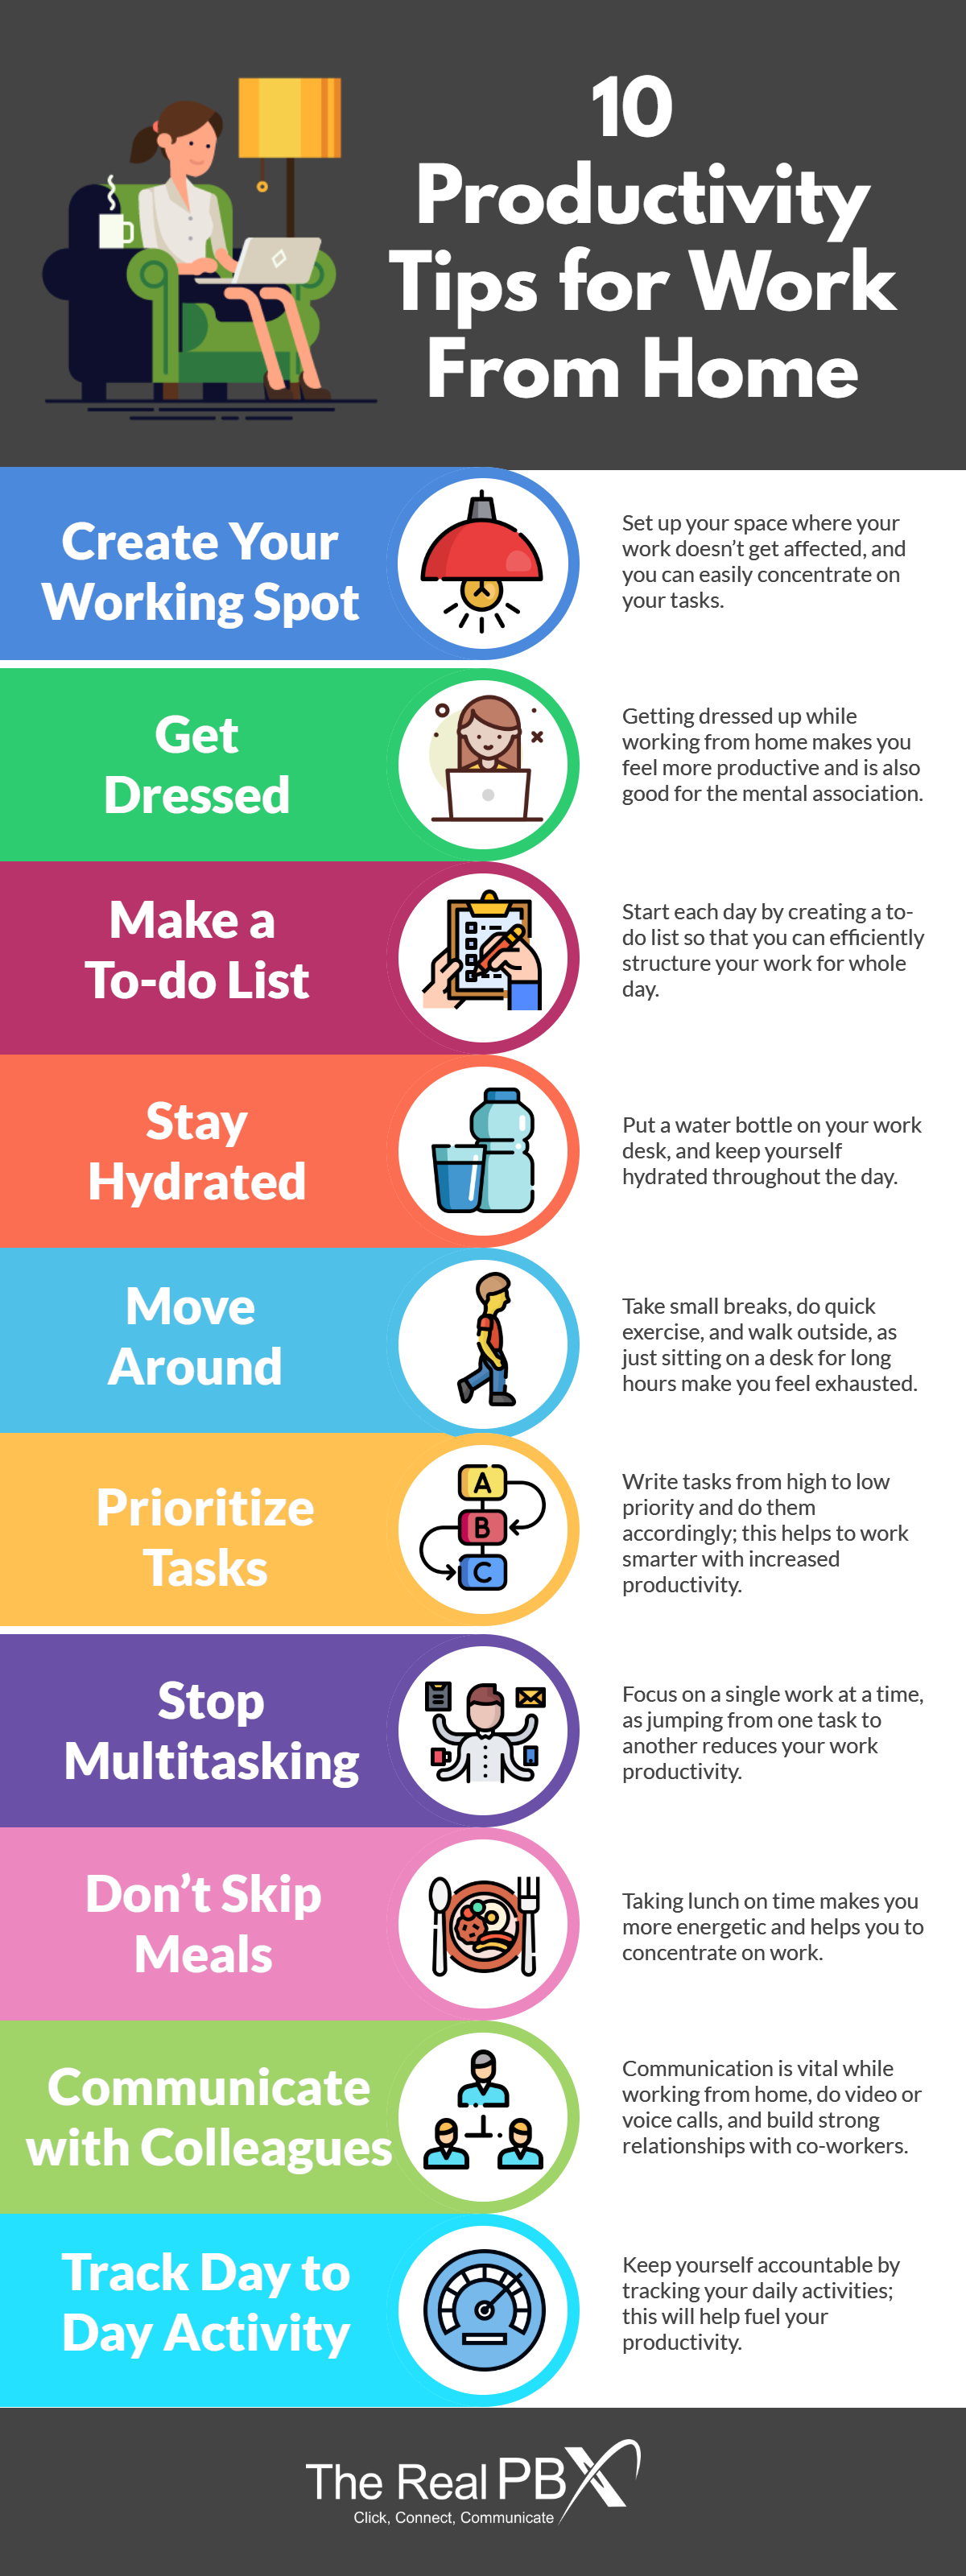 work from home productivity tips infographic